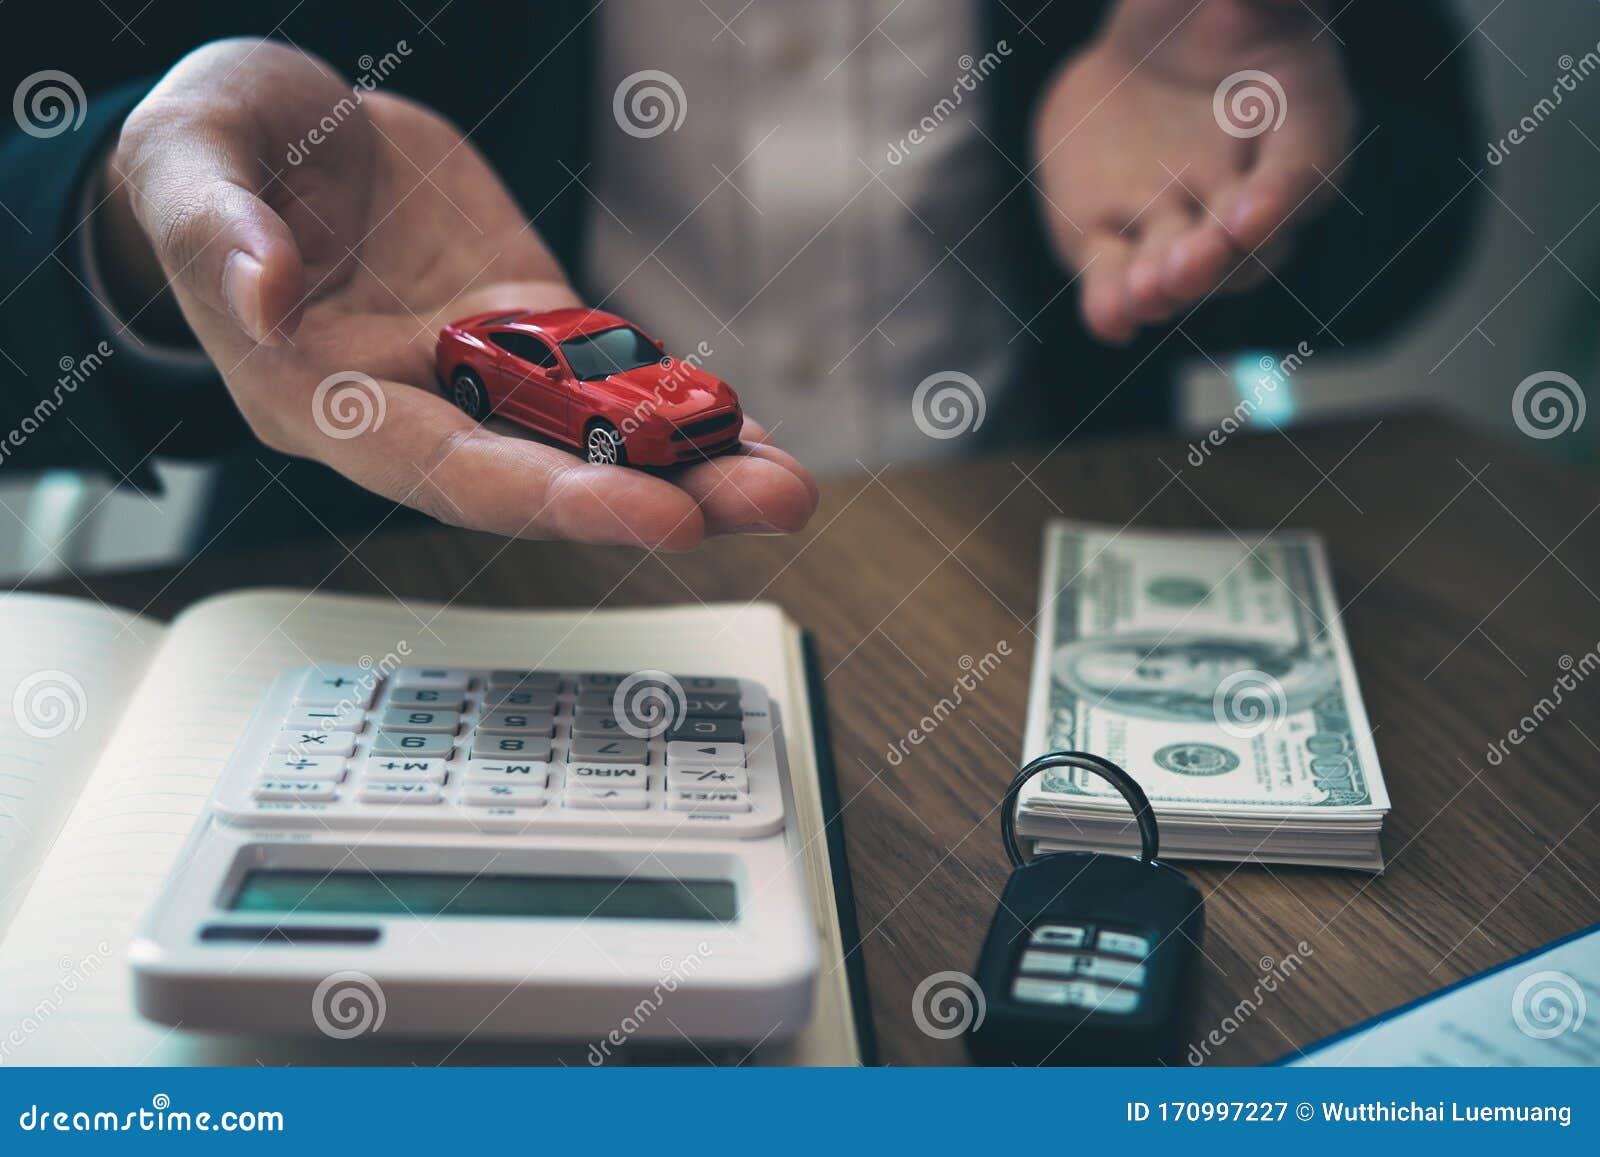 sales car agent explains about the contract to buy a new car to the customer and the payment of installments